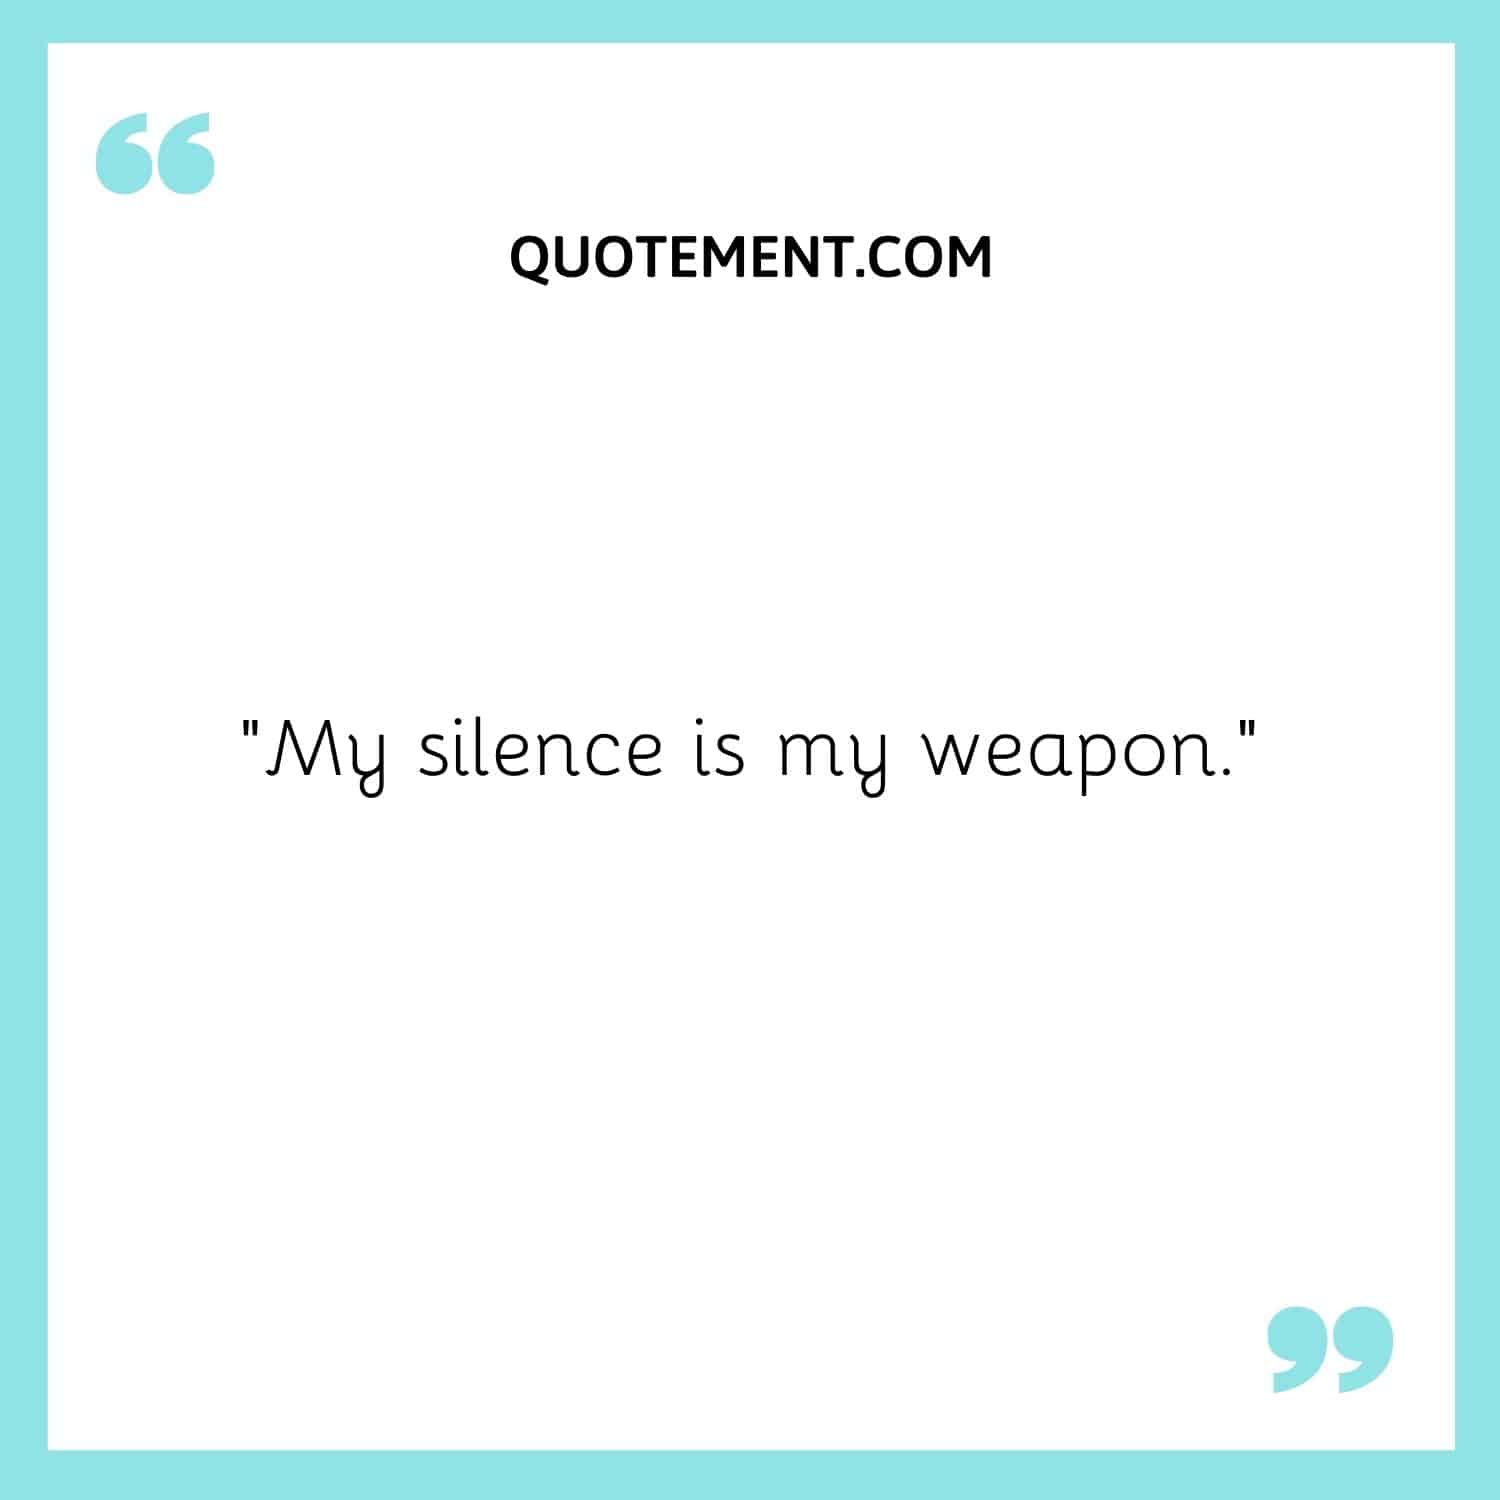 “My silence is my weapon.”